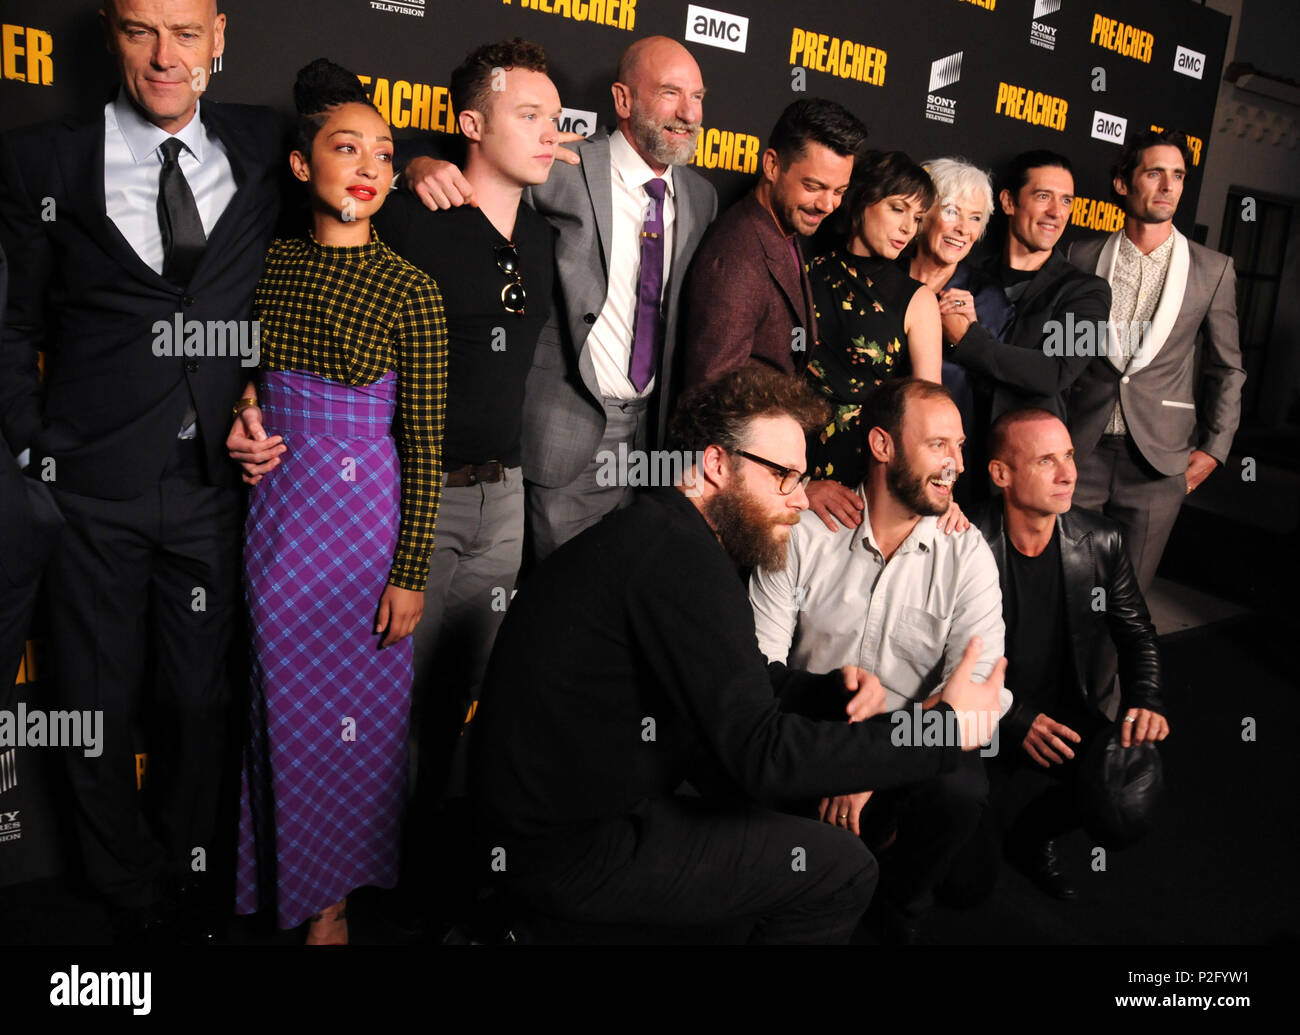 LOS ANGELES, CA - JUNE 14: (L-R) Actor Pip Torrens, actress Ruth Negga, actors Ian Colletti, Graham McTavish, Dominic Cooper, Julie Ann Emery, Betty Buckley, Adam Croasdell, Tyson Ritter and Colin Cunningham and executive producers Seth Rogen and Evan Goldberg (front)  attend AMC's 'Preacher' Season 3 Premiere Party on June 14, 2018 at The Hearth and Hound in Los Angeles, California. Photo by Barry King/Alamy Live News Stock Photo